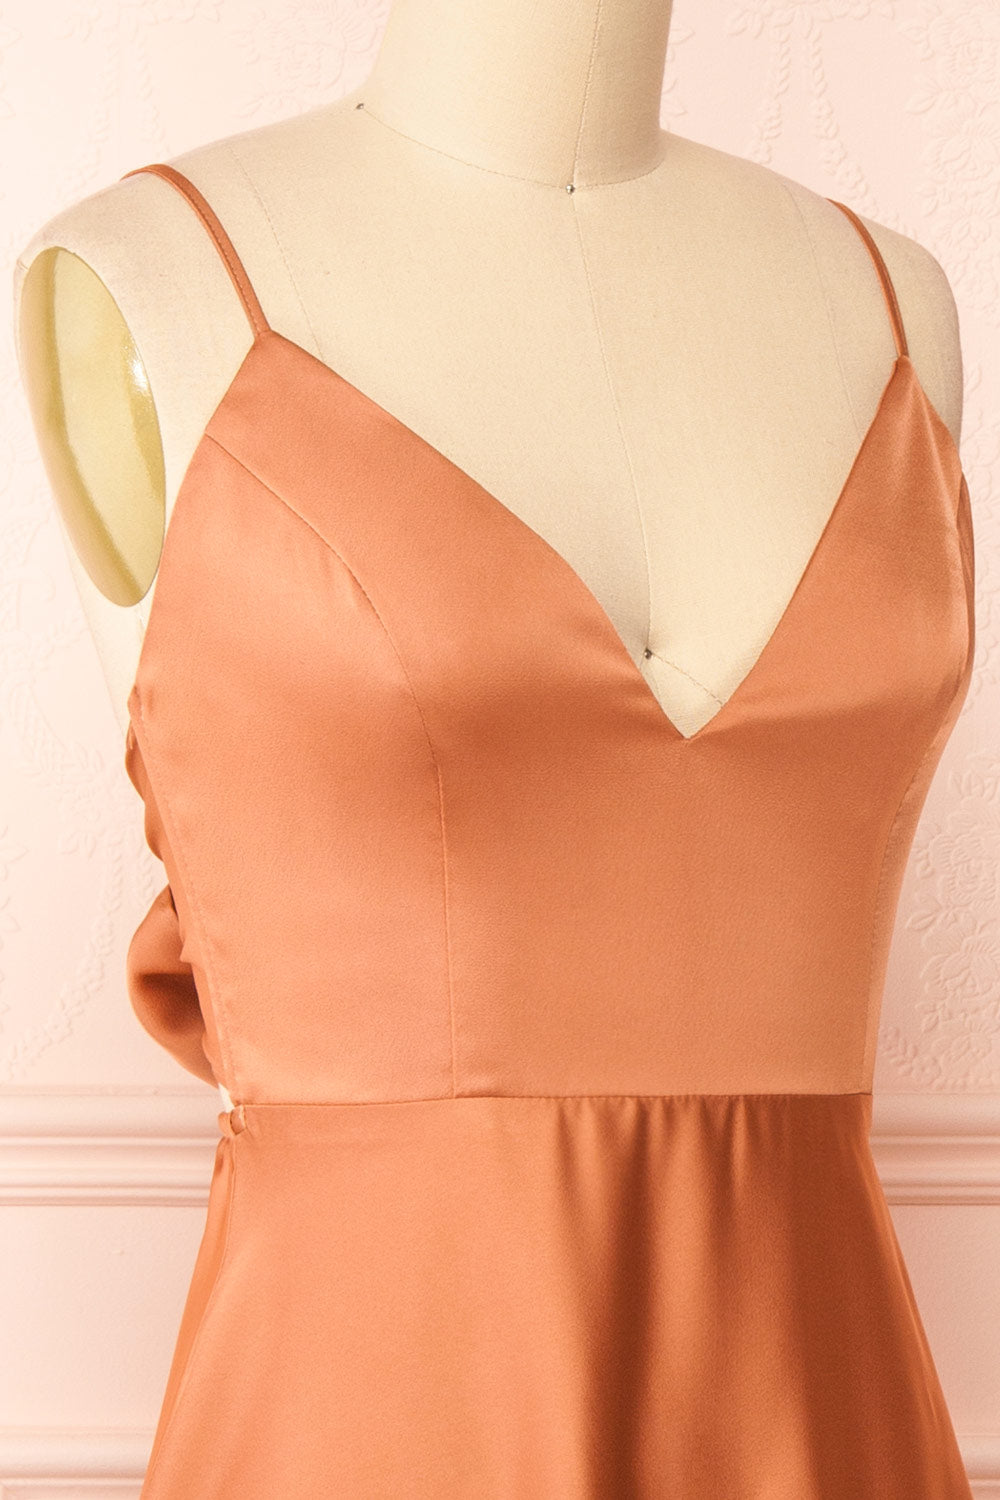 Prudence Rust Silky Midi Dress| Boutique 1861 side close-up